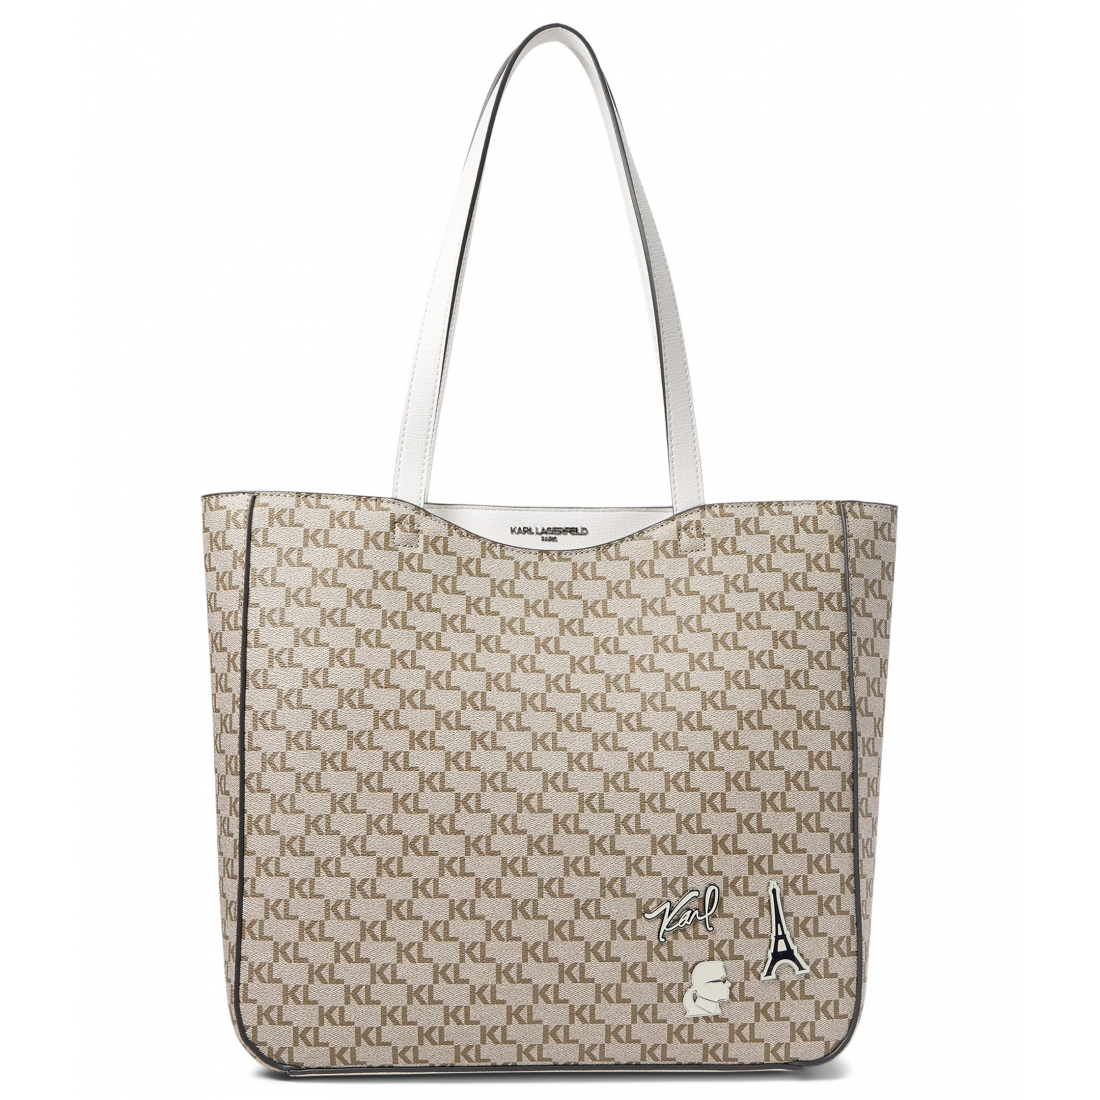 Women's 'Canelle' Tote Bag